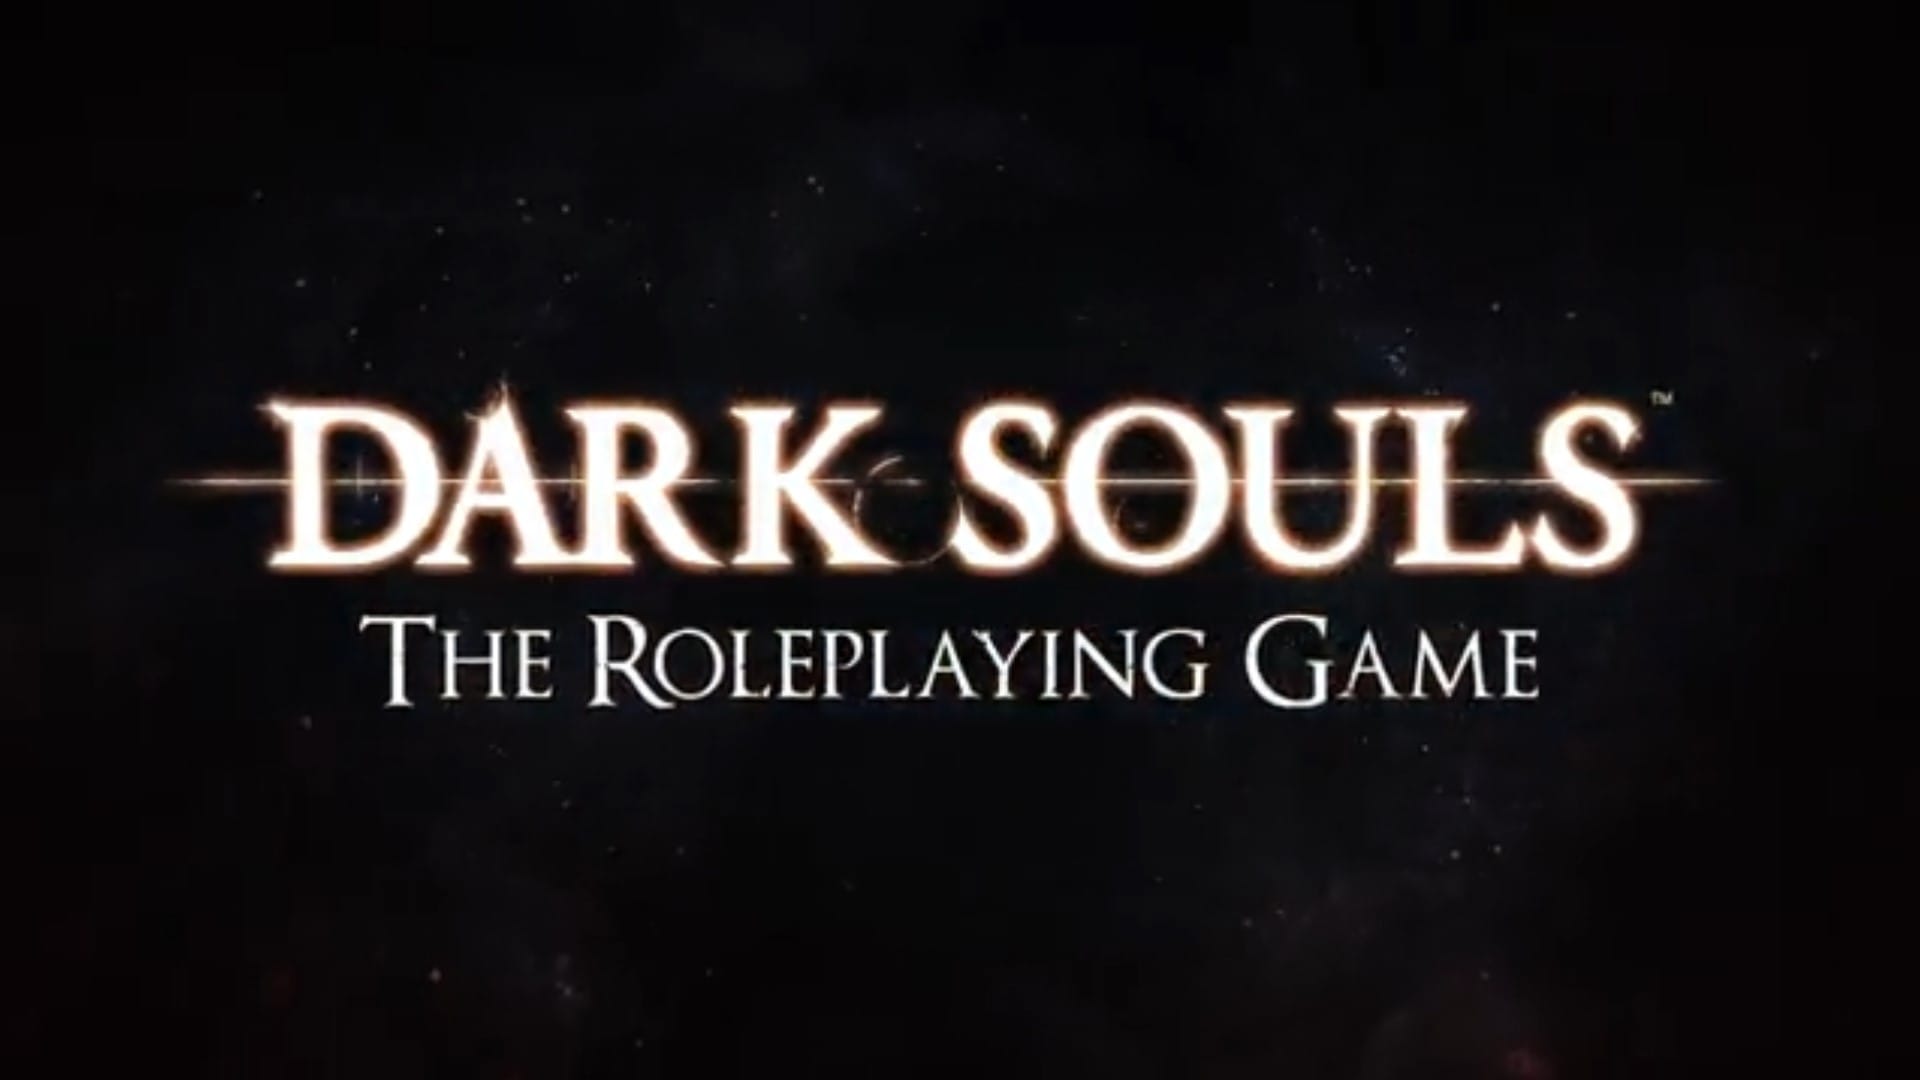 The logo for the Dark Souls tabletop RPG on a black background